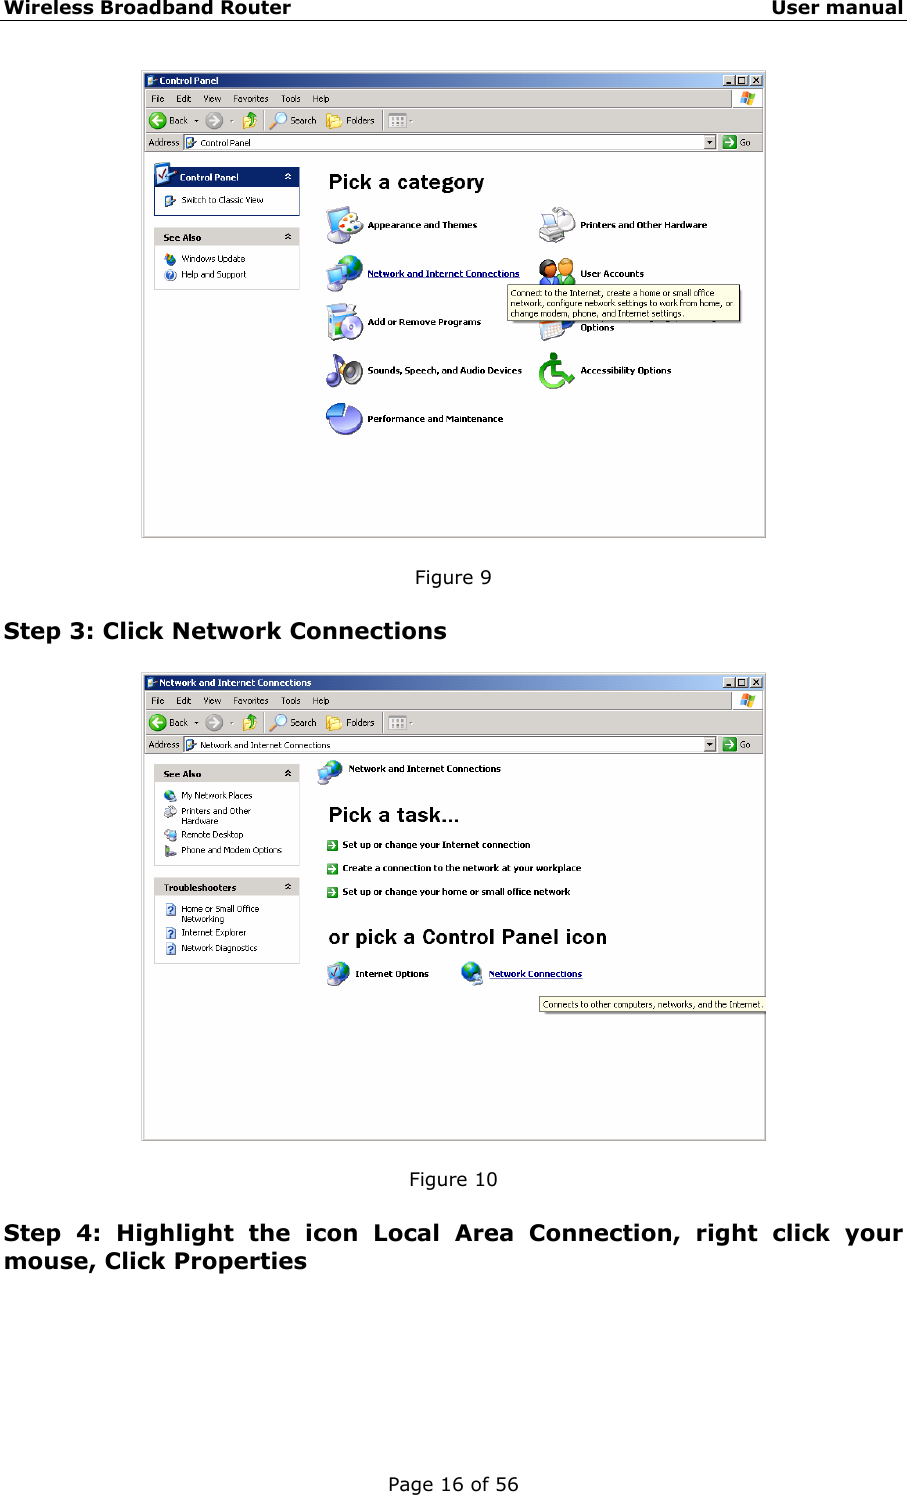 Wireless Broadband Router                                                   User manual Page 16 of 56   Figure 9  Step 3: Click Network Connections    Figure 10  Step 4: Highlight the icon Local Area Connection, right click your mouse, Click Properties 